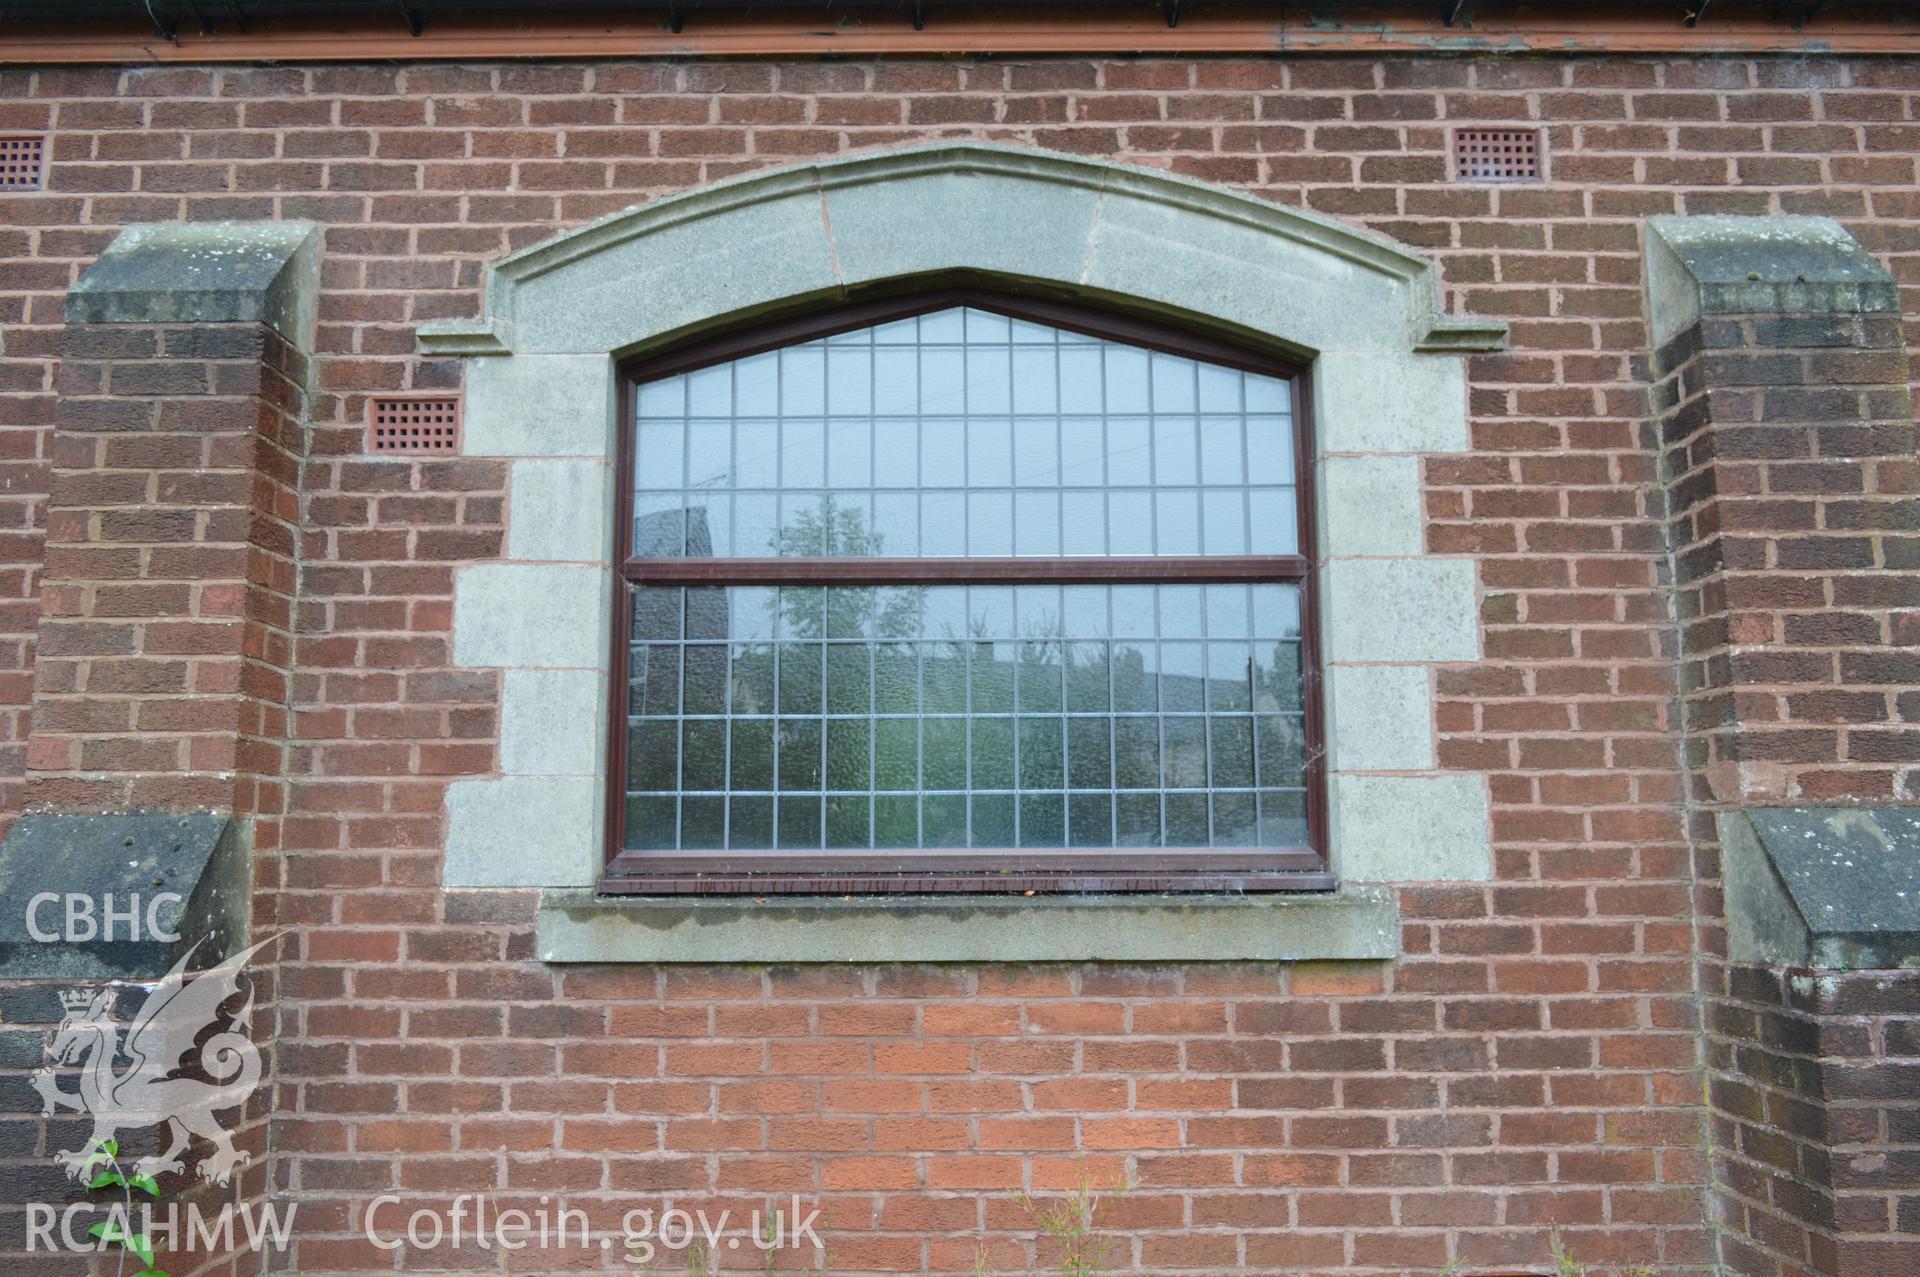 External view showing window detail in the north elevation of the Church. Digital colour photograph taken during CPAT Project 2396 at the United Reformed Church in Northop. Prepared by Clwyd Powys Archaeological Trust, 2018-2019.